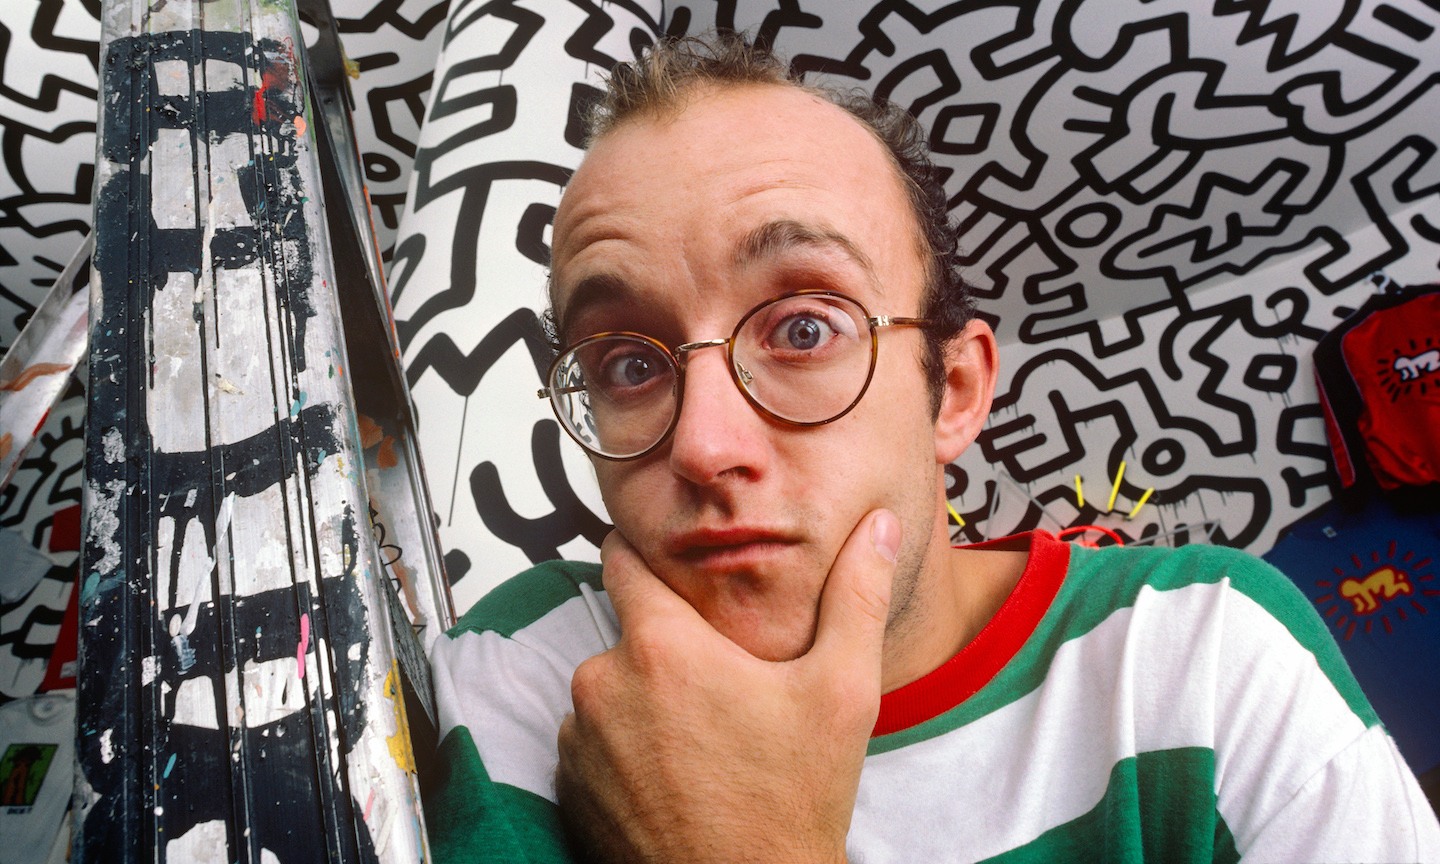 https://www.udiscovermusic.com/wp-content/uploads/2023/06/Keith-Haring-Chuck-D-1.jpg